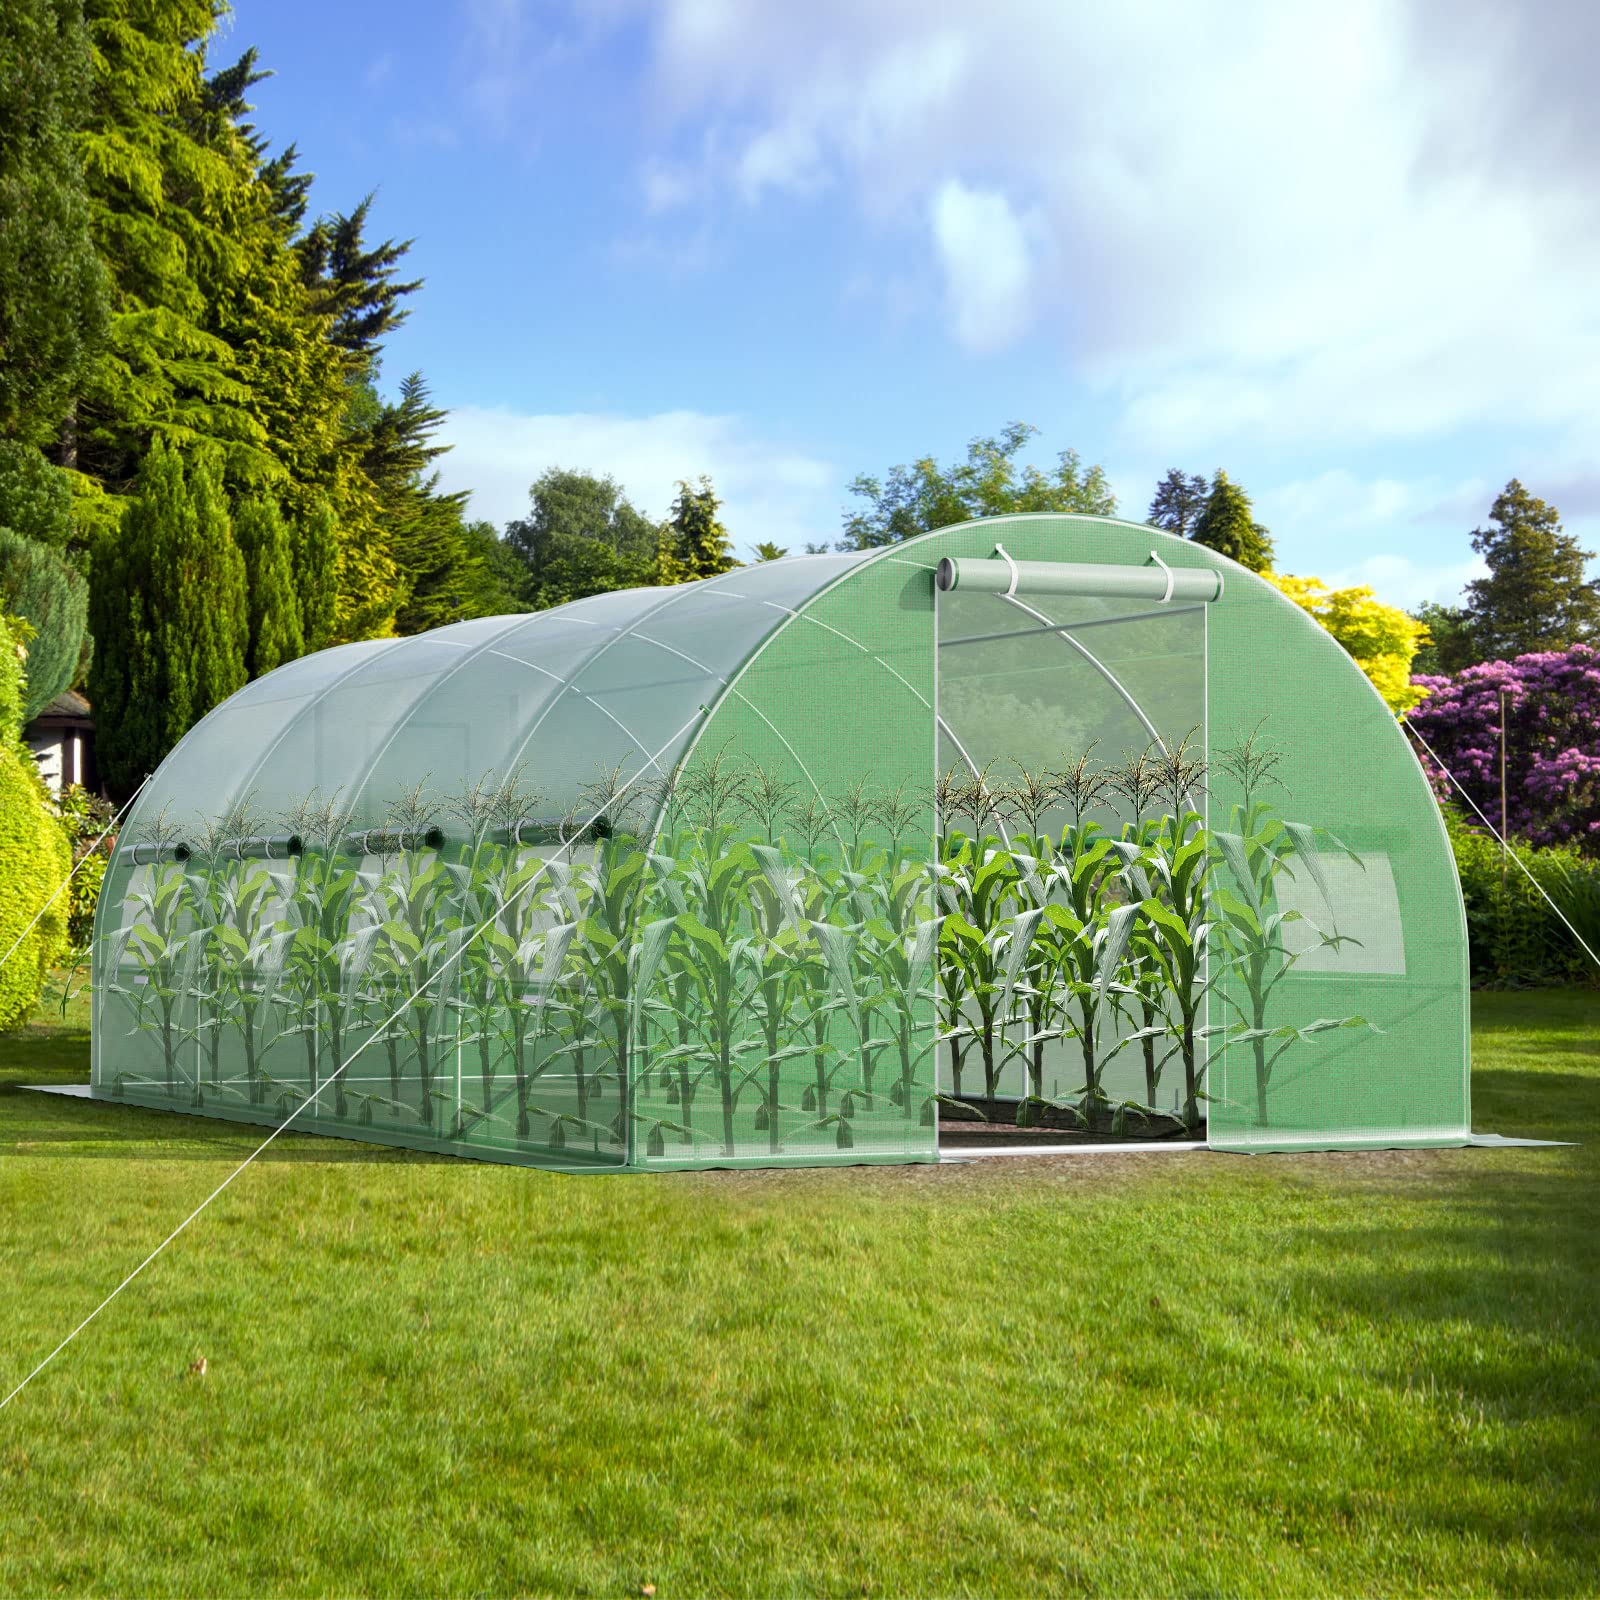 Giantex Greenhouse, 20 x 10 x 6.6 FT Large Walk in Greenhouse Outdoor